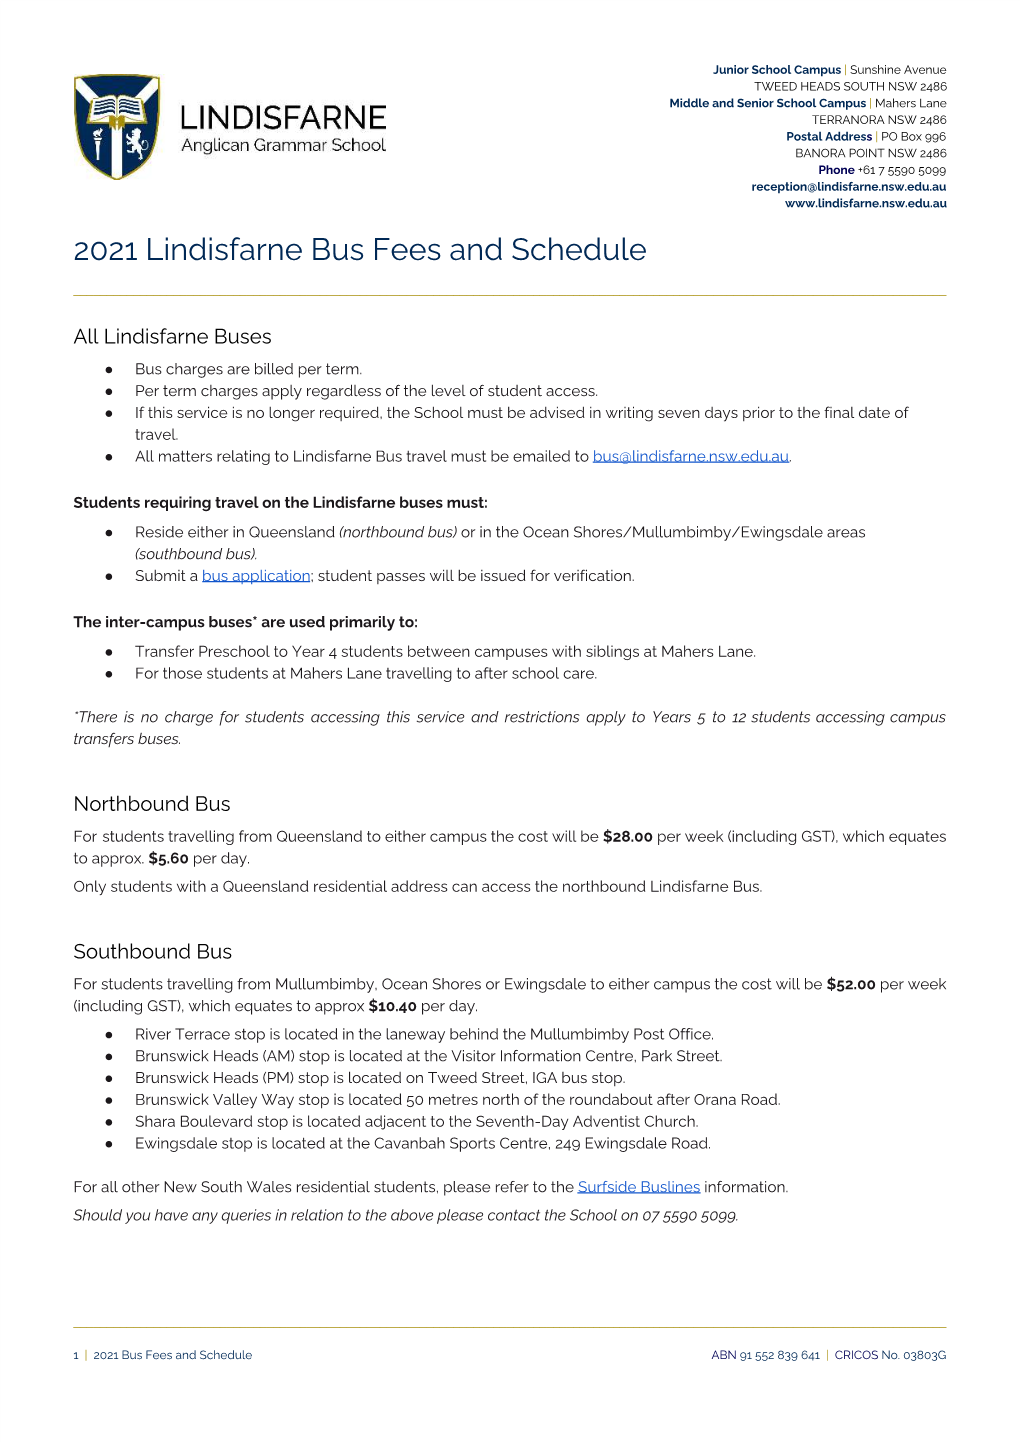 2021 Lindisfarne Bus Fees and Schedule